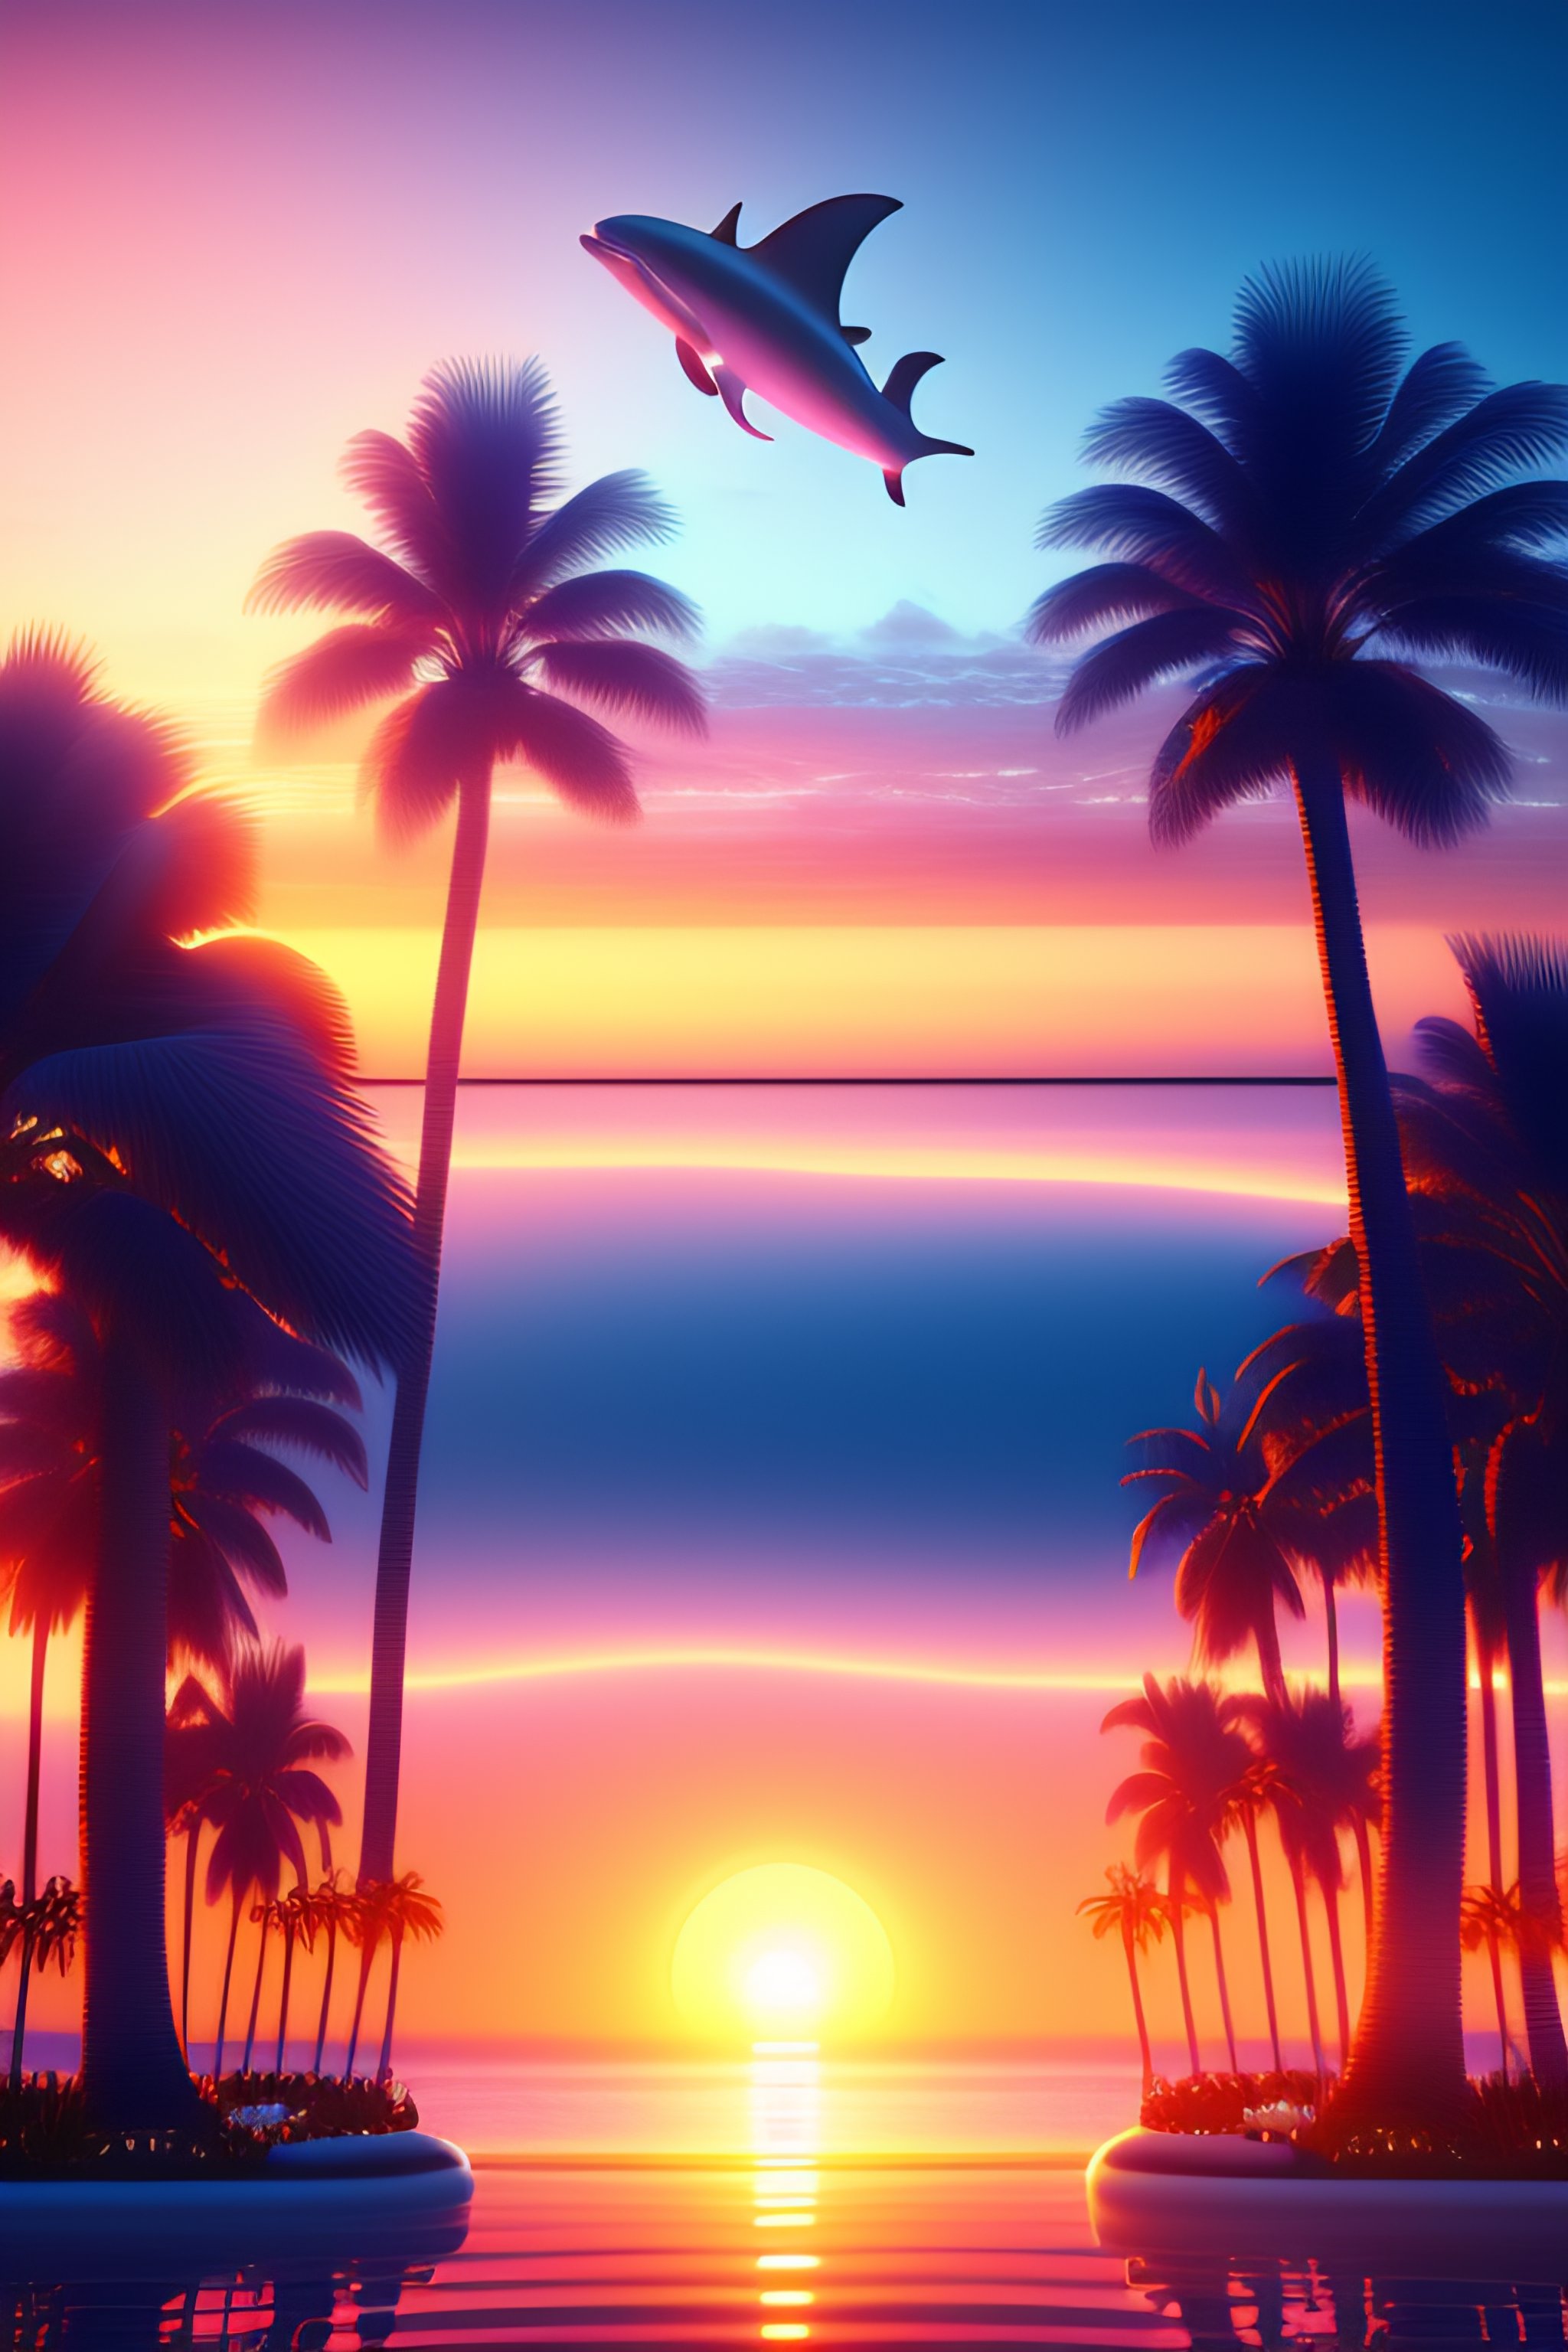 ocean sunset with dolphins and palm trees